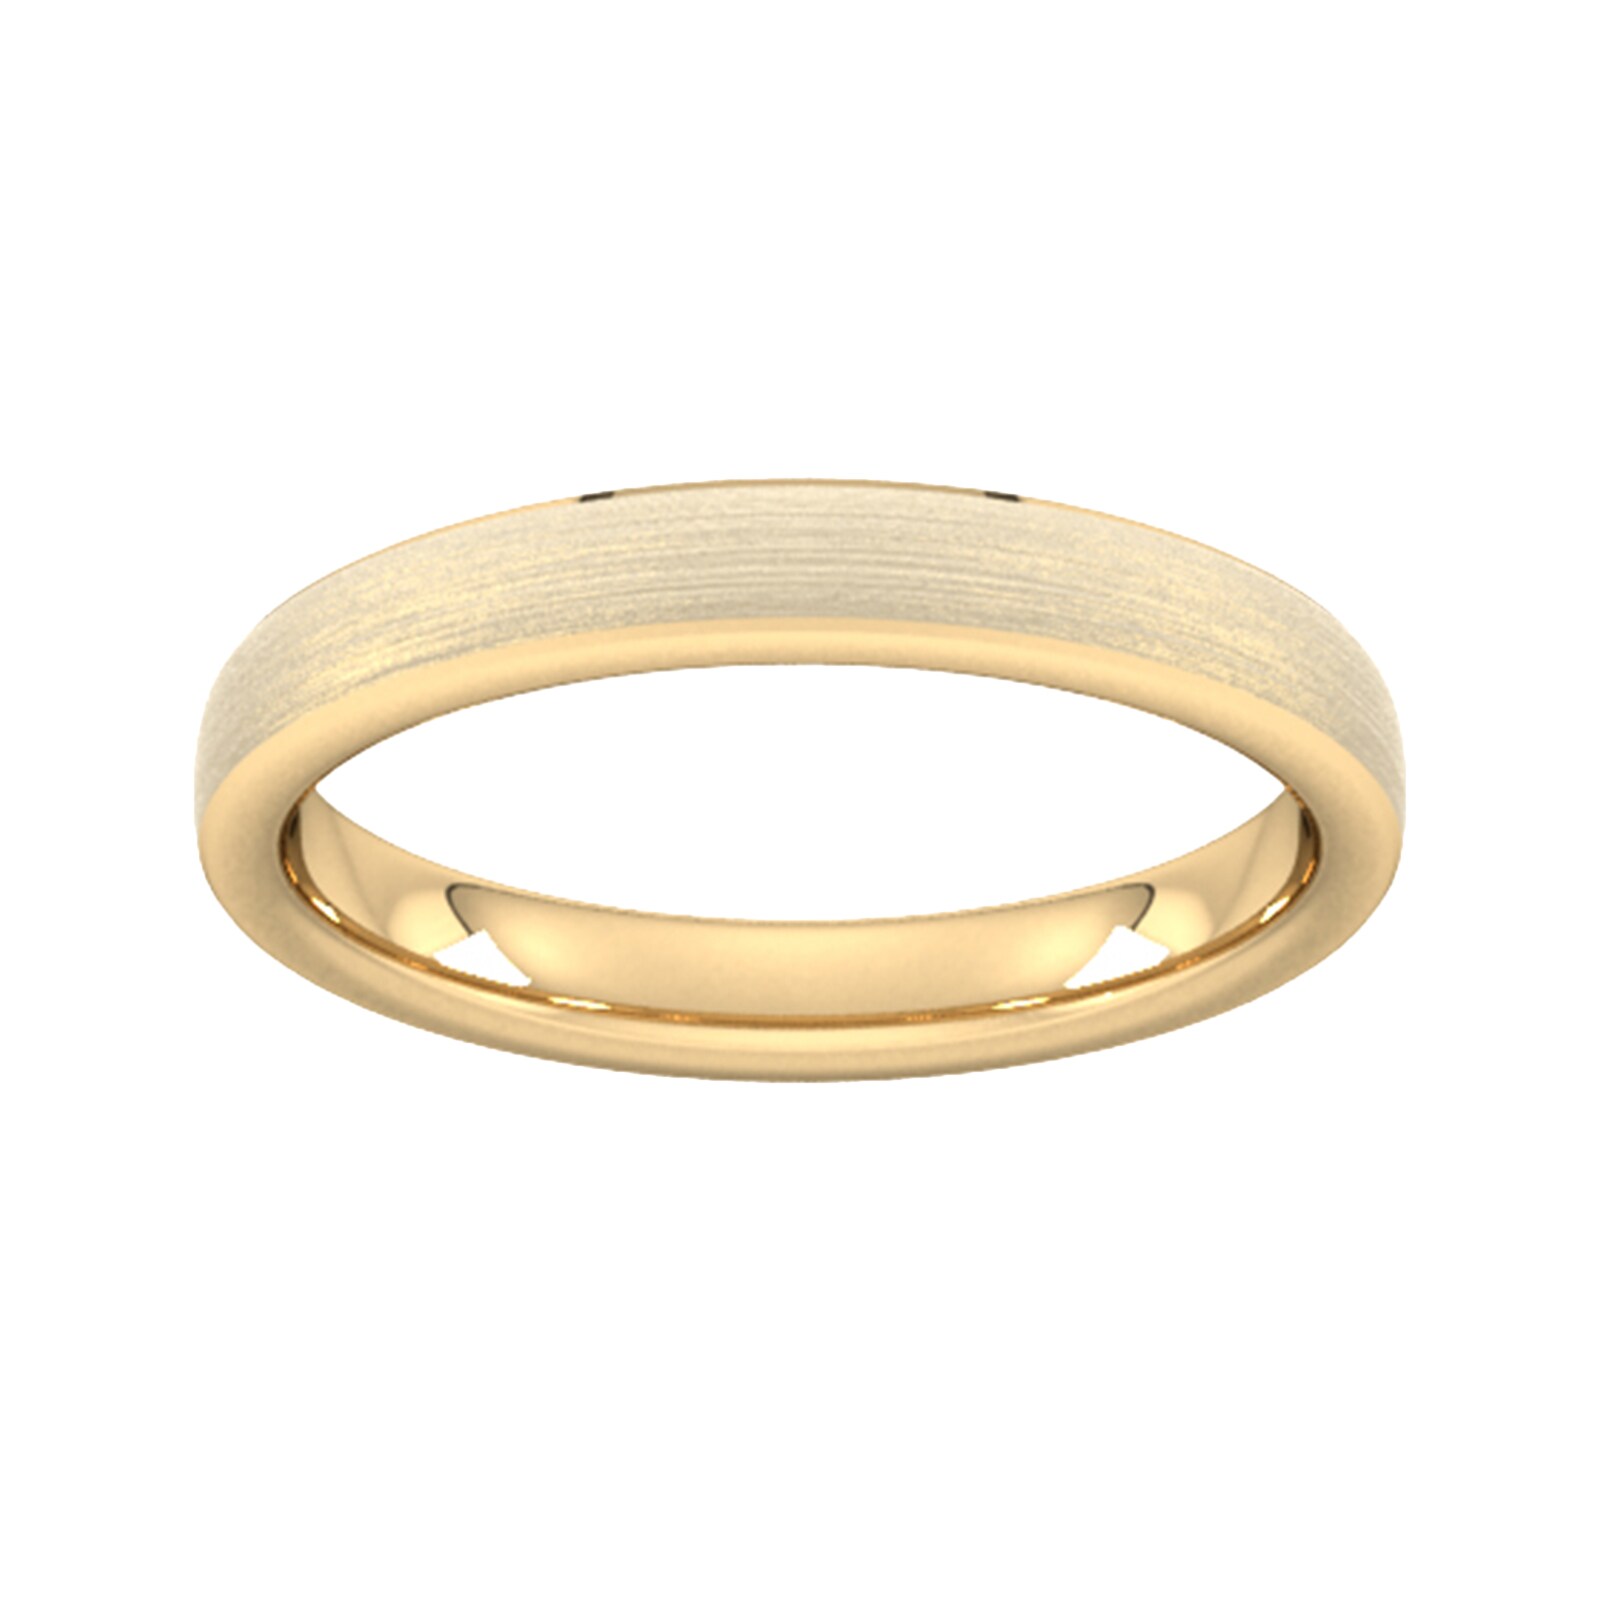 3mm Flat Court Heavy Polished Chamfered Edges With Matt Centre Wedding Ring In 18 Carat Yellow Gold - Ring Size L